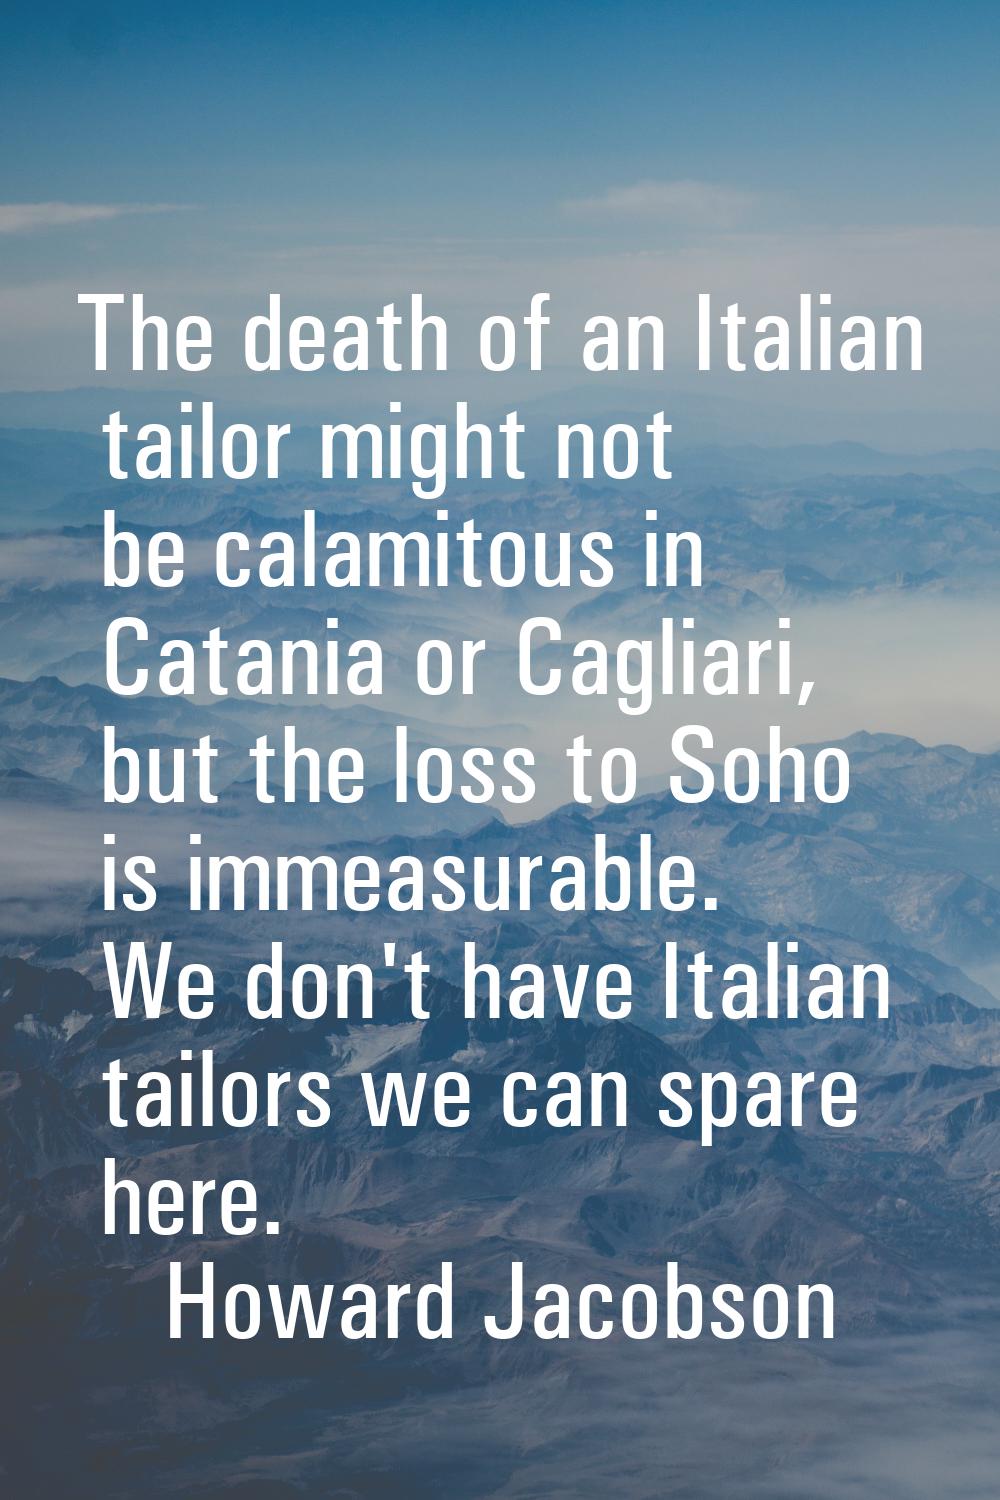 The death of an Italian tailor might not be calamitous in Catania or Cagliari, but the loss to Soho